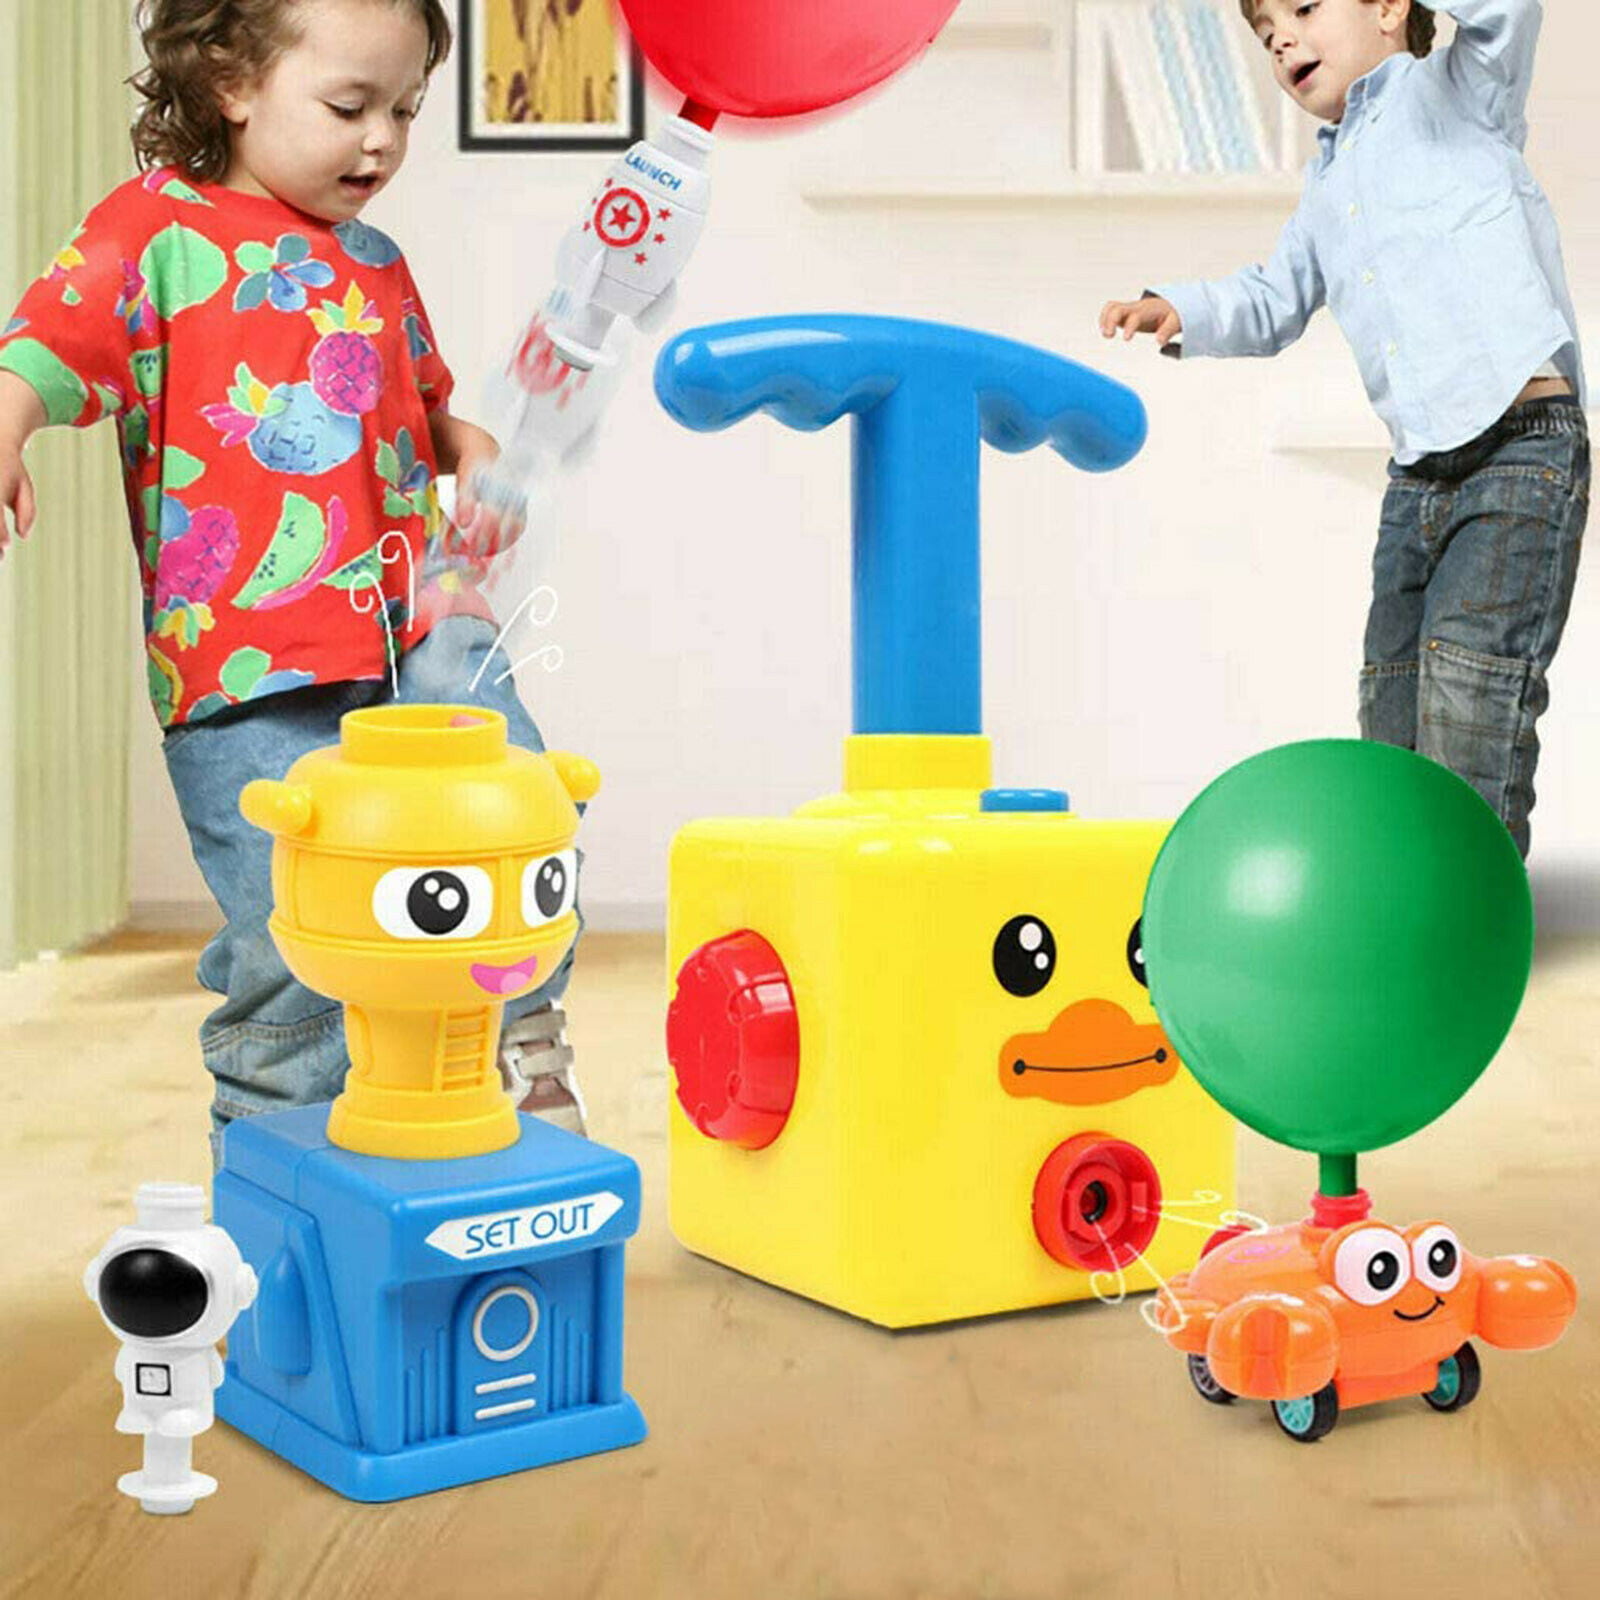 Kids Experiment Game Balloon Launcher & Powered Car Toy Set Toy Gift  ABS 